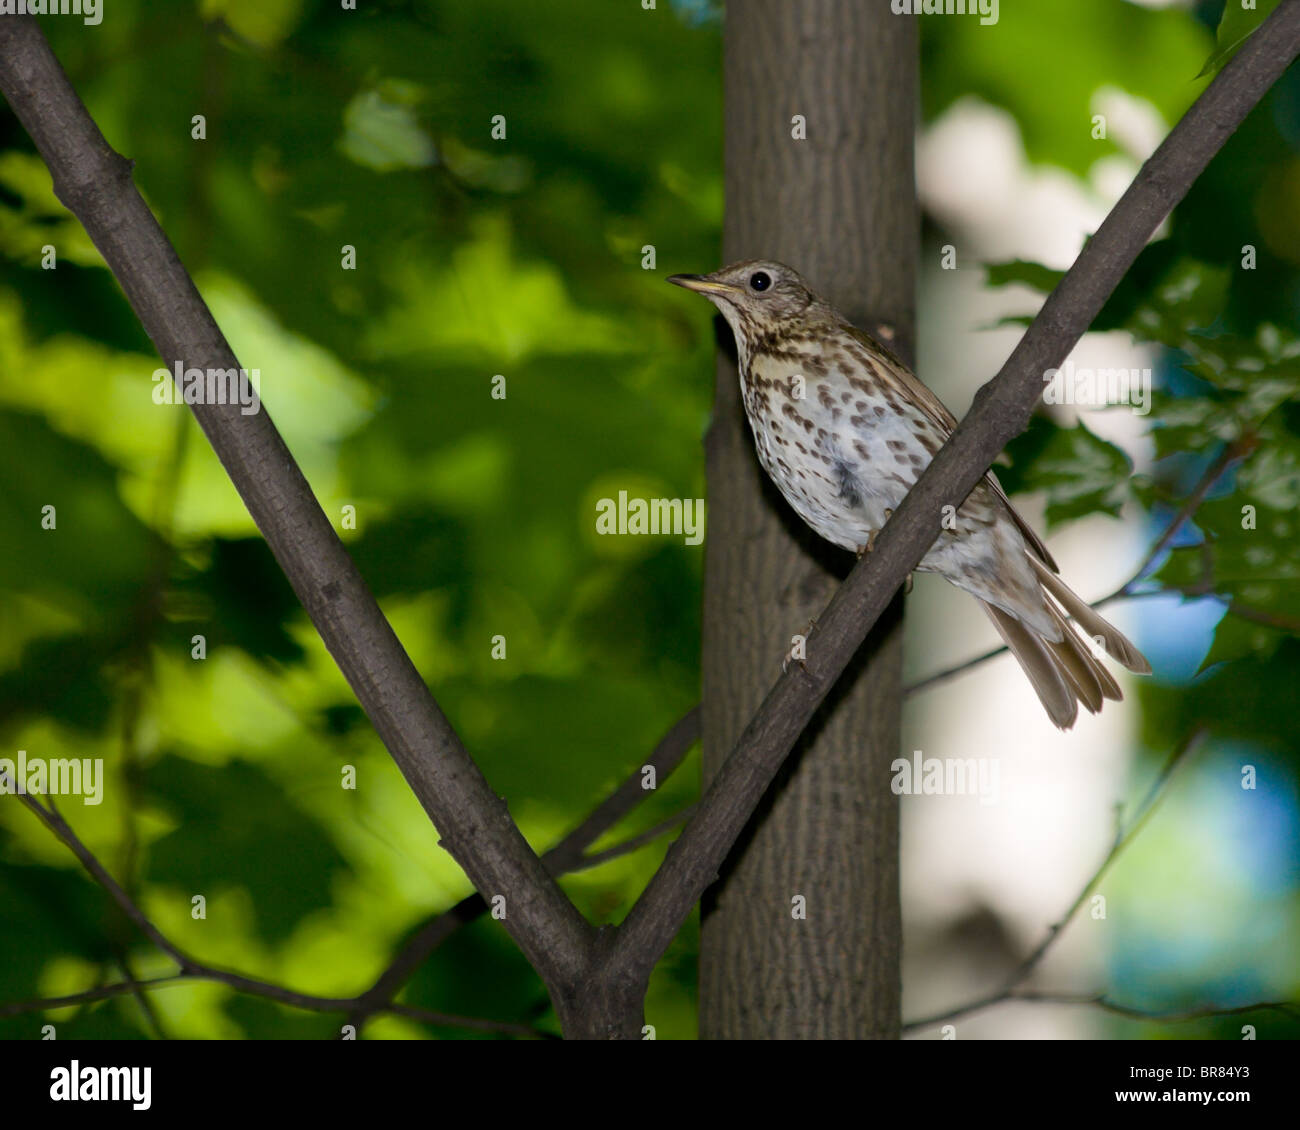 The Song Thrush (Turdus philomelos) is in the wild nature. Stock Photo